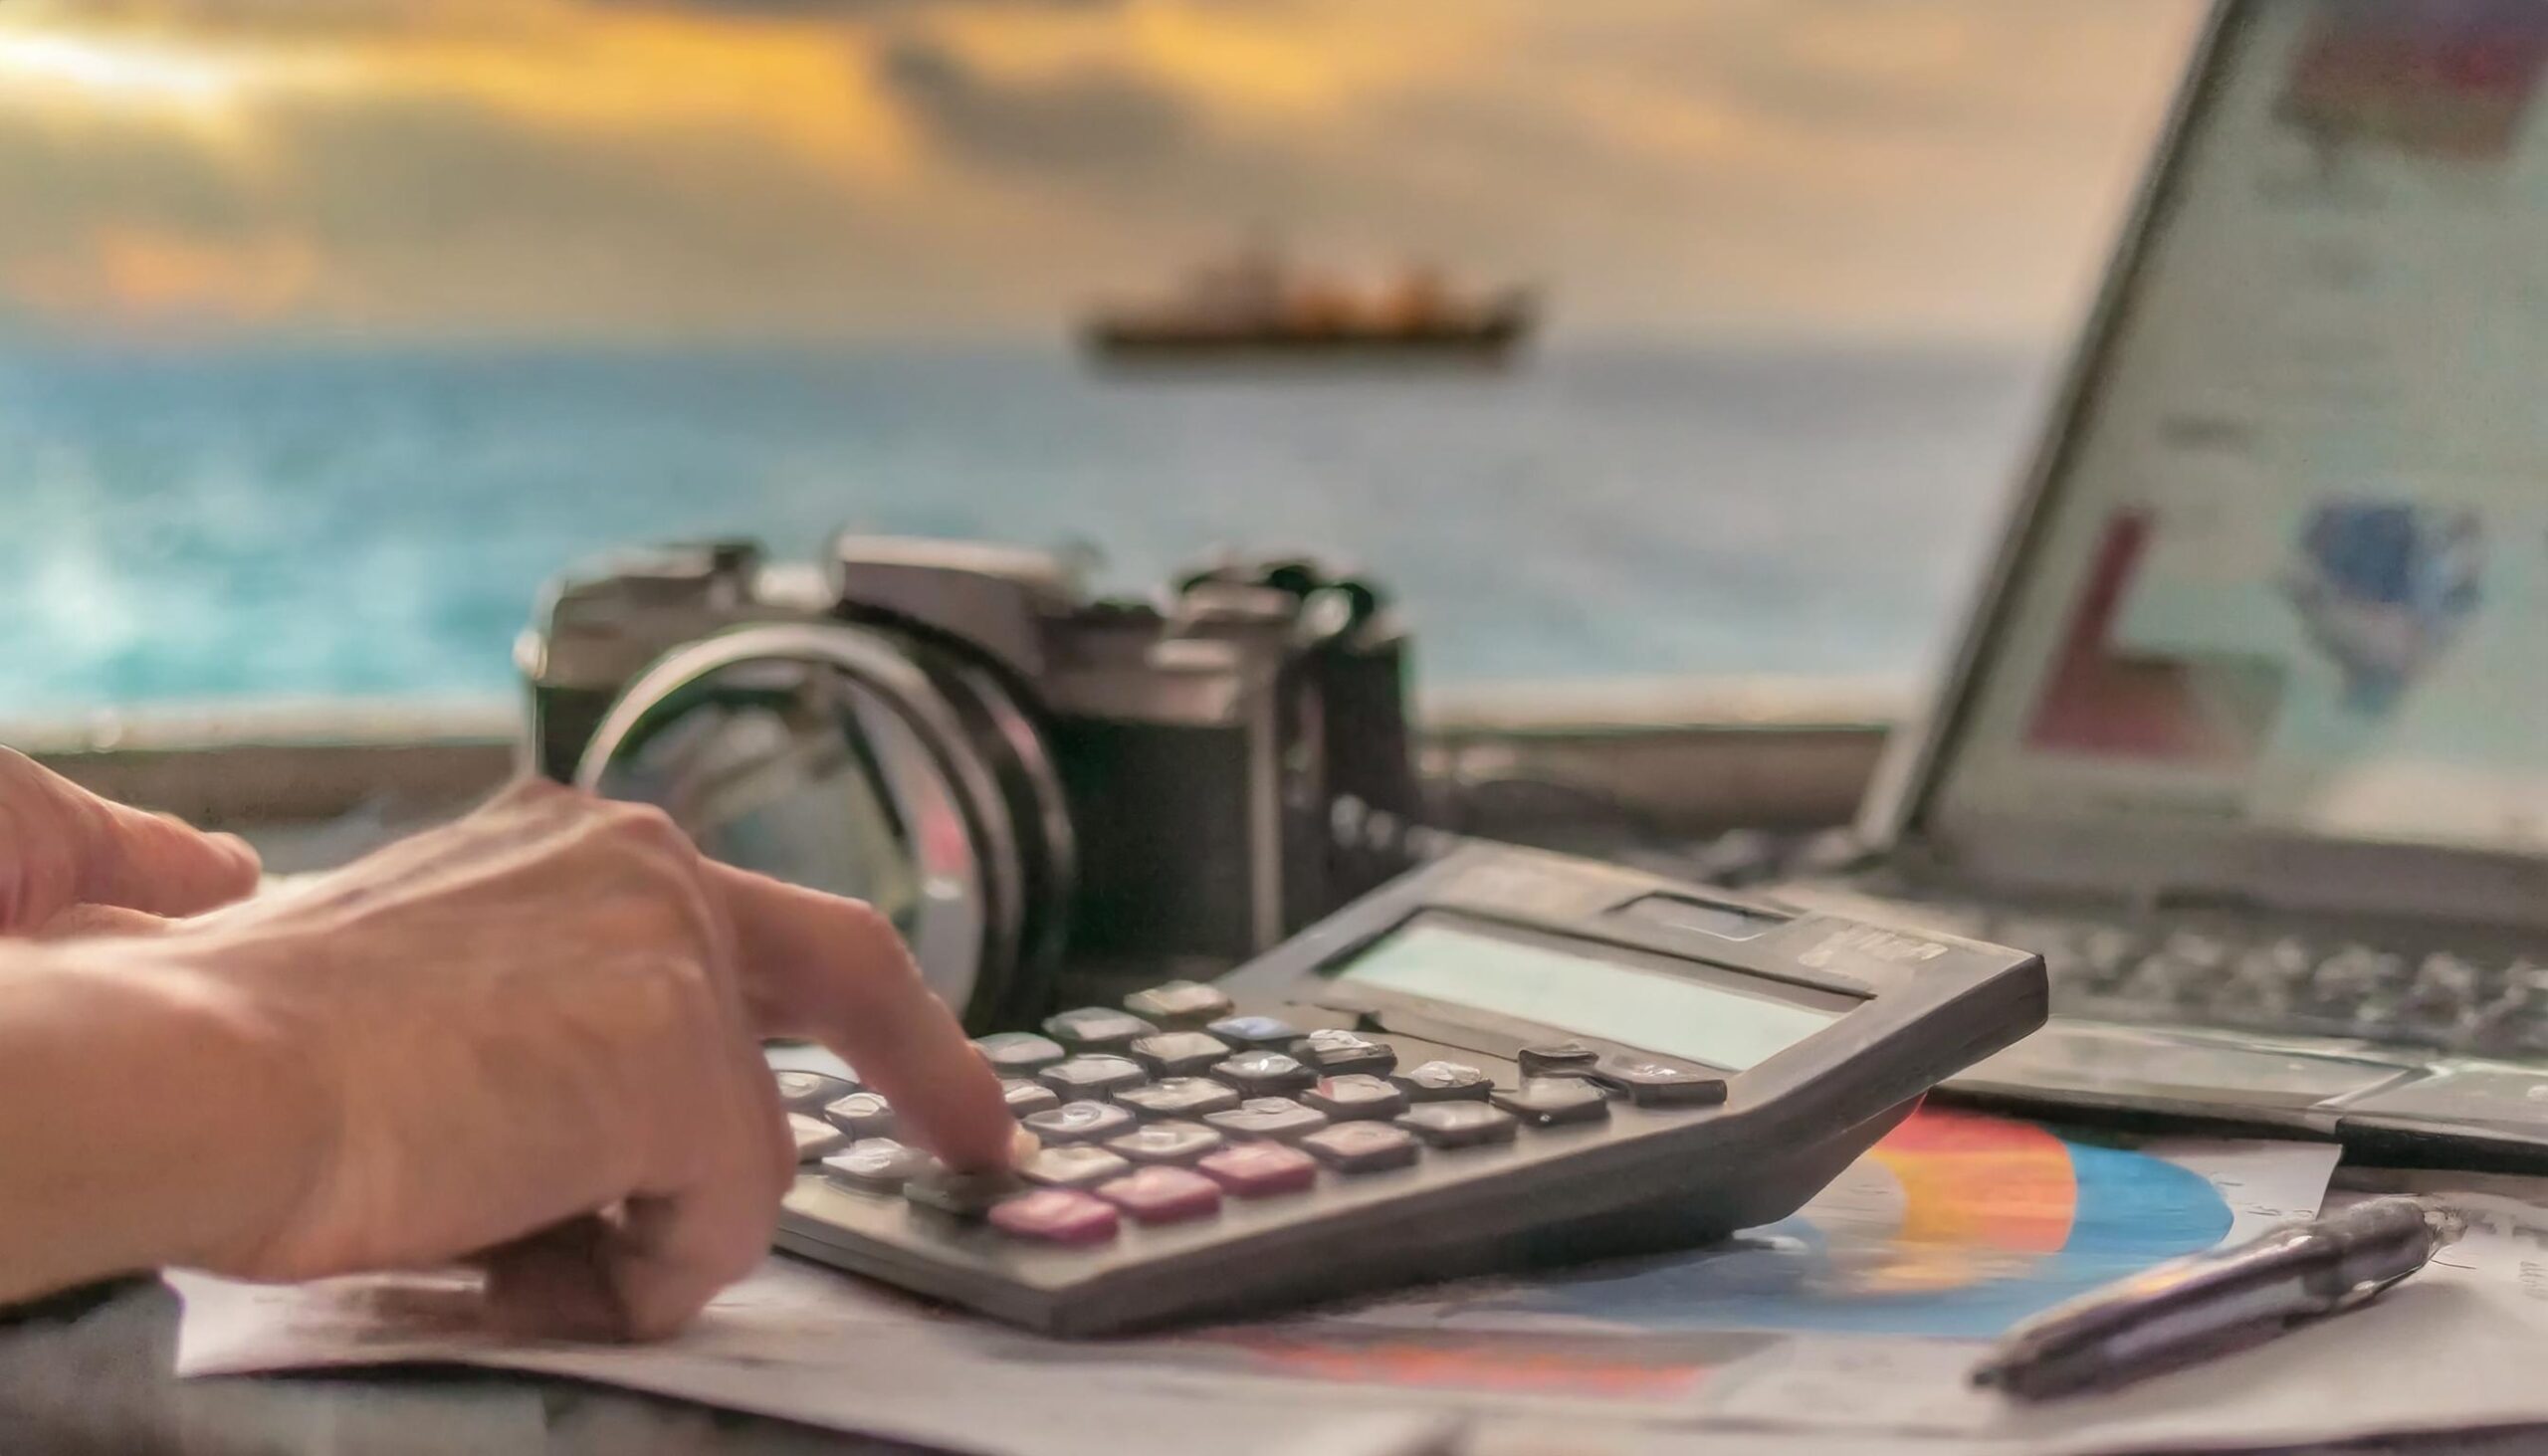 Workspace during sunset with a calculator, camera, and laptop on a desk, symbolizing commercial photography planning with an ocean view.